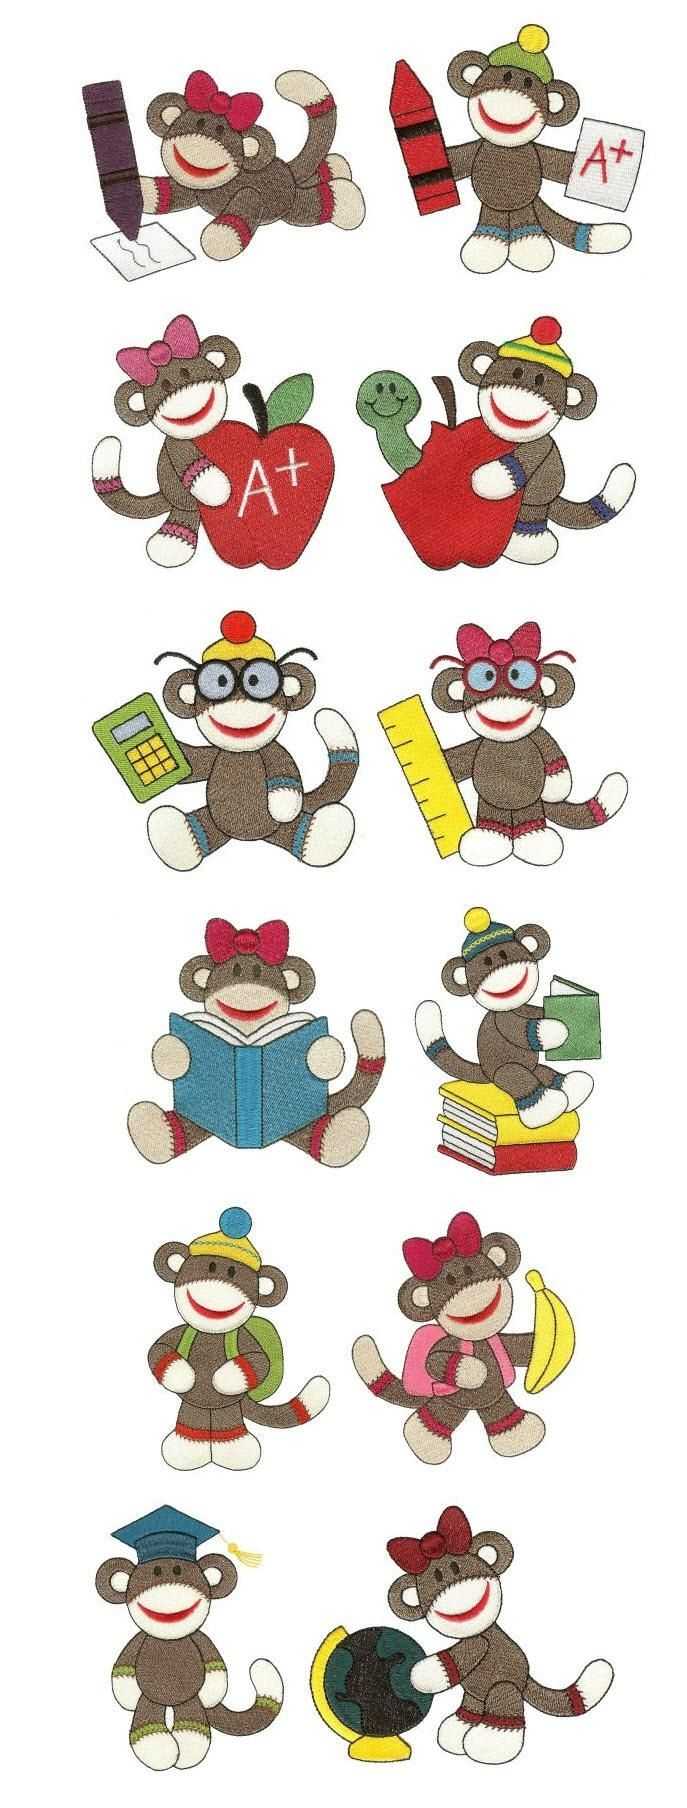 627 Best Images Animaux D'ailleurs Images On Pinterest | Animals Throughout Sock Monkey Wall Art (Photo 16 of 20)